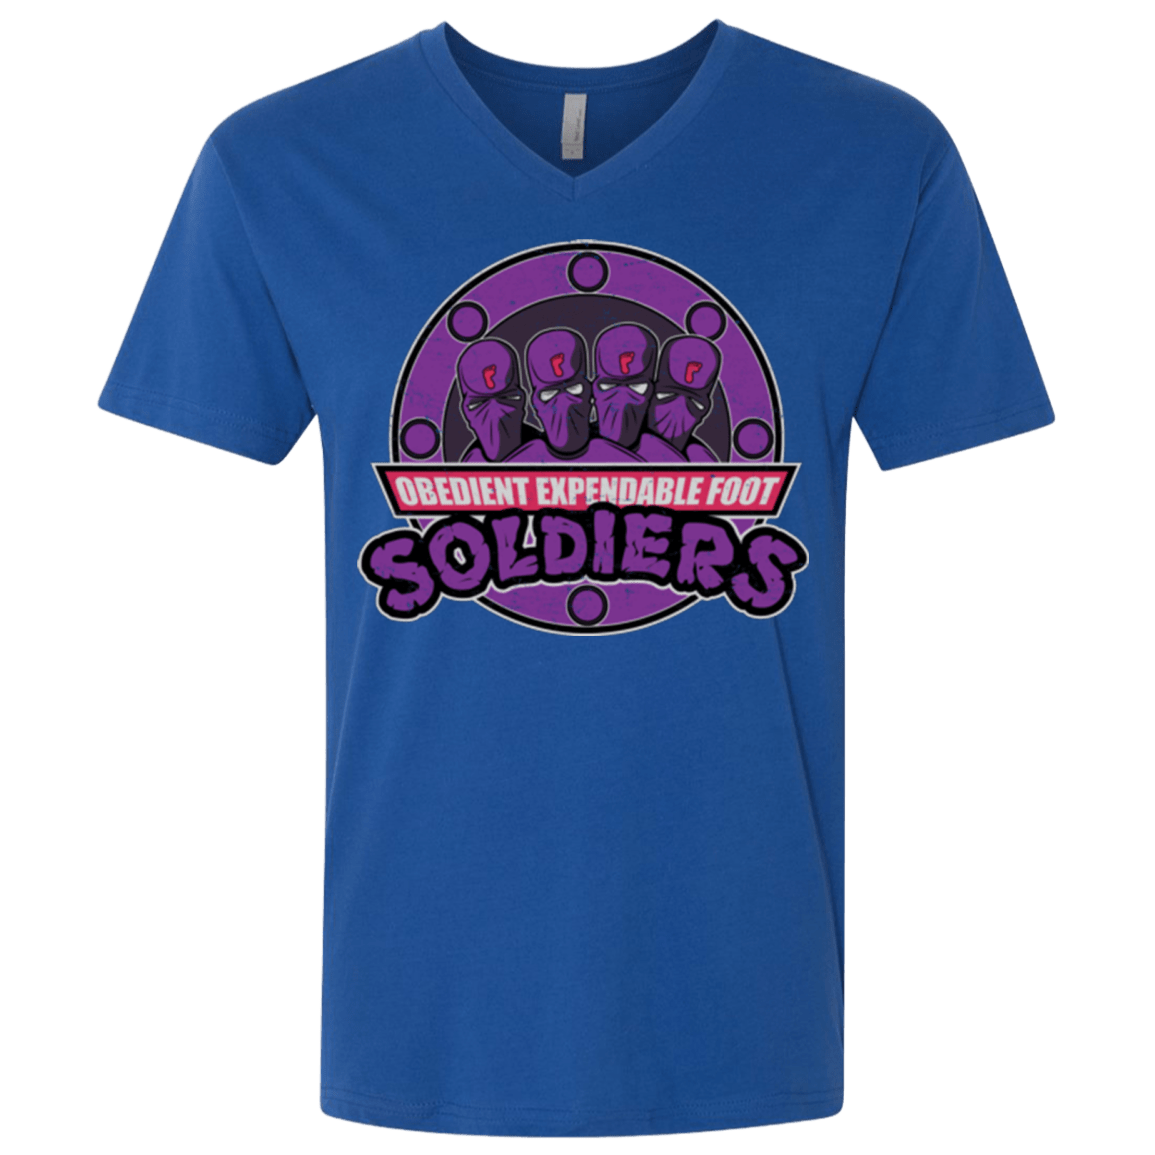 T-Shirts Royal / X-Small OBEDIENT EXPENDABLE FOOT SOLDIERS Men's Premium V-Neck